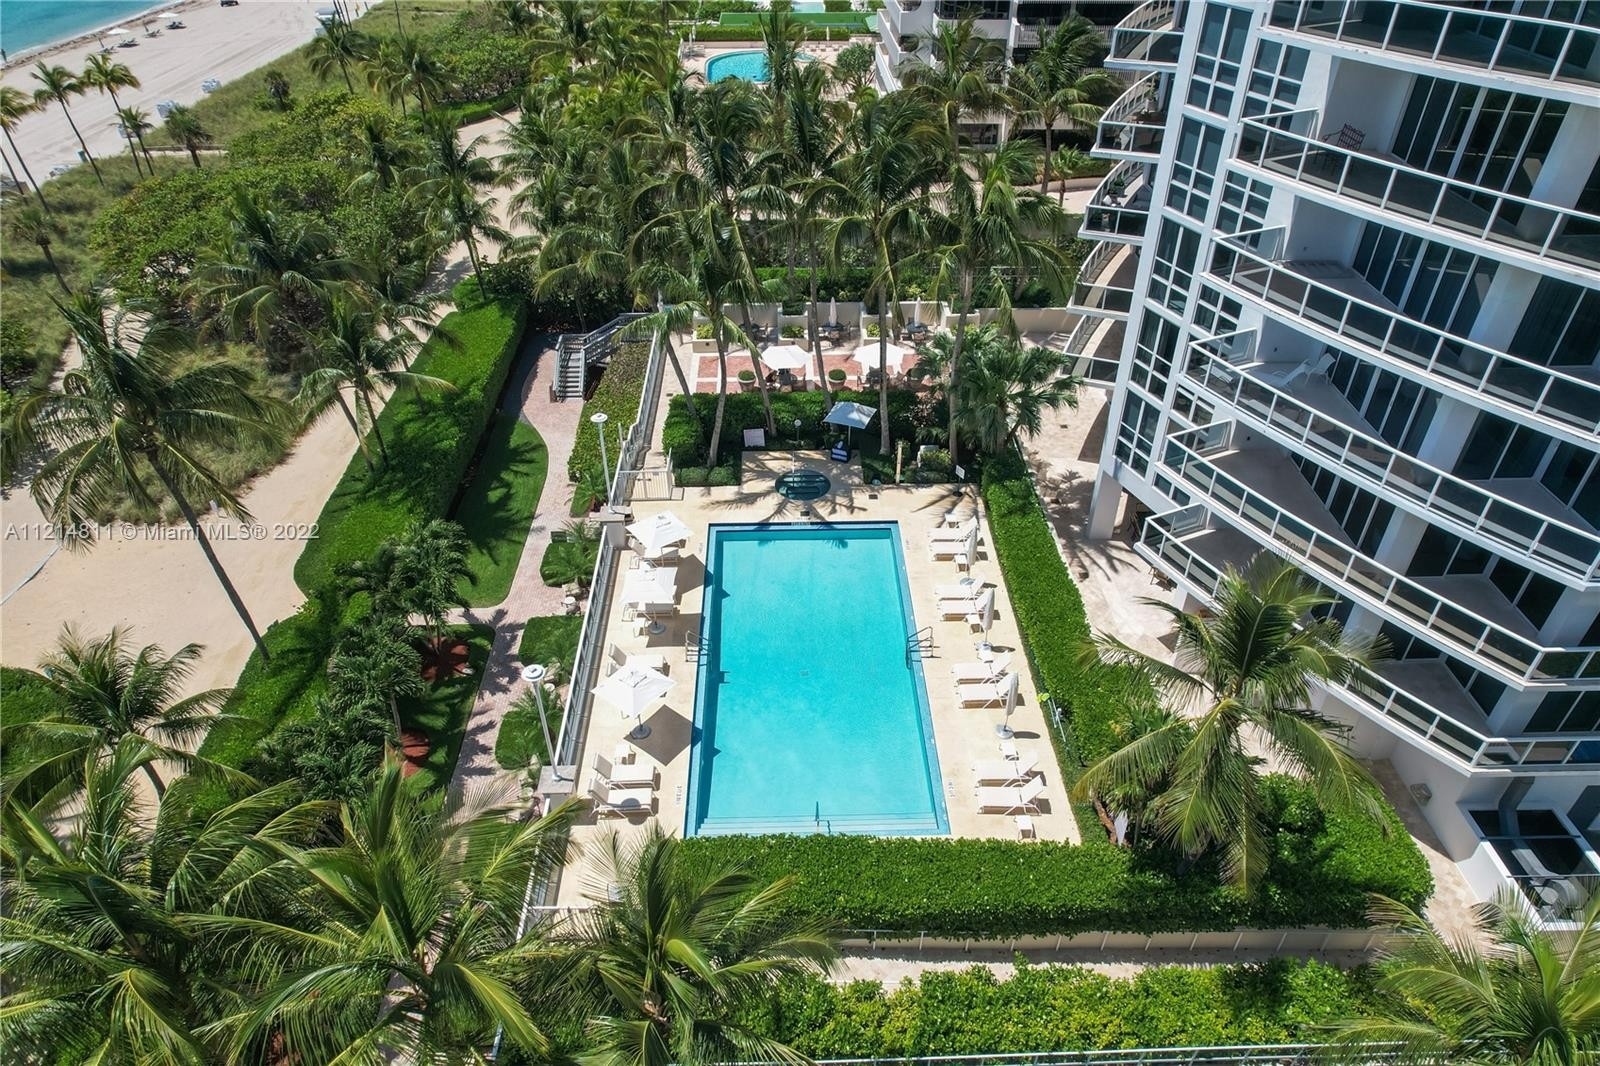 35. Condominiums for Sale at 10225 Collins Ave , 902 Bal Harbour, FL 33154